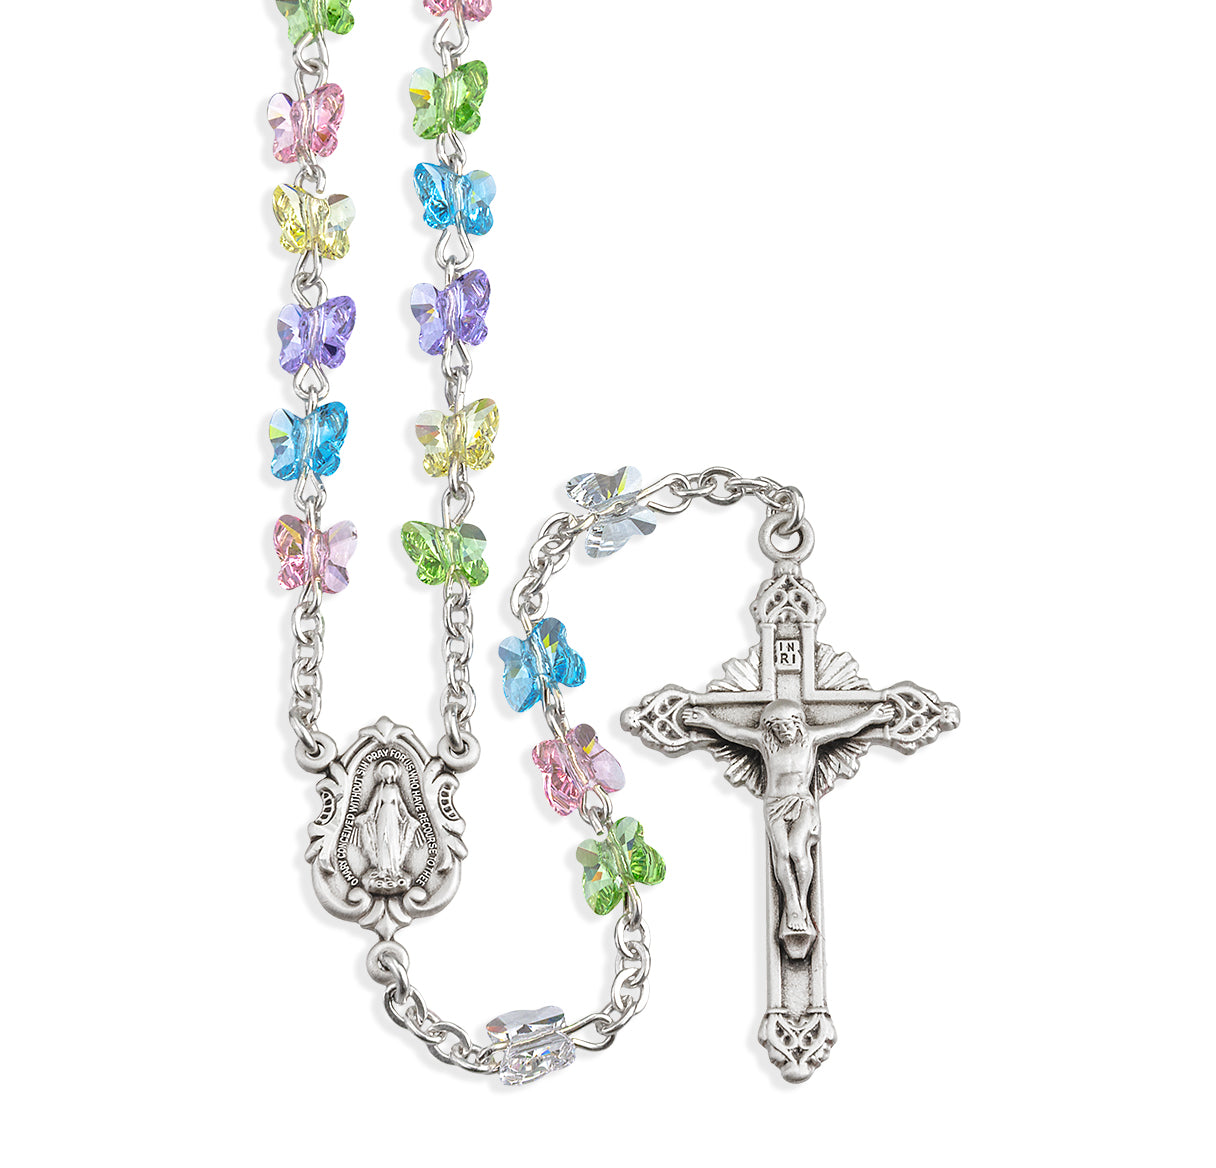 Sterling Silver Rosary Hand Made with 6mm Swarovski Crystal 6mm Multi-Color Butterfly Beads by HMH